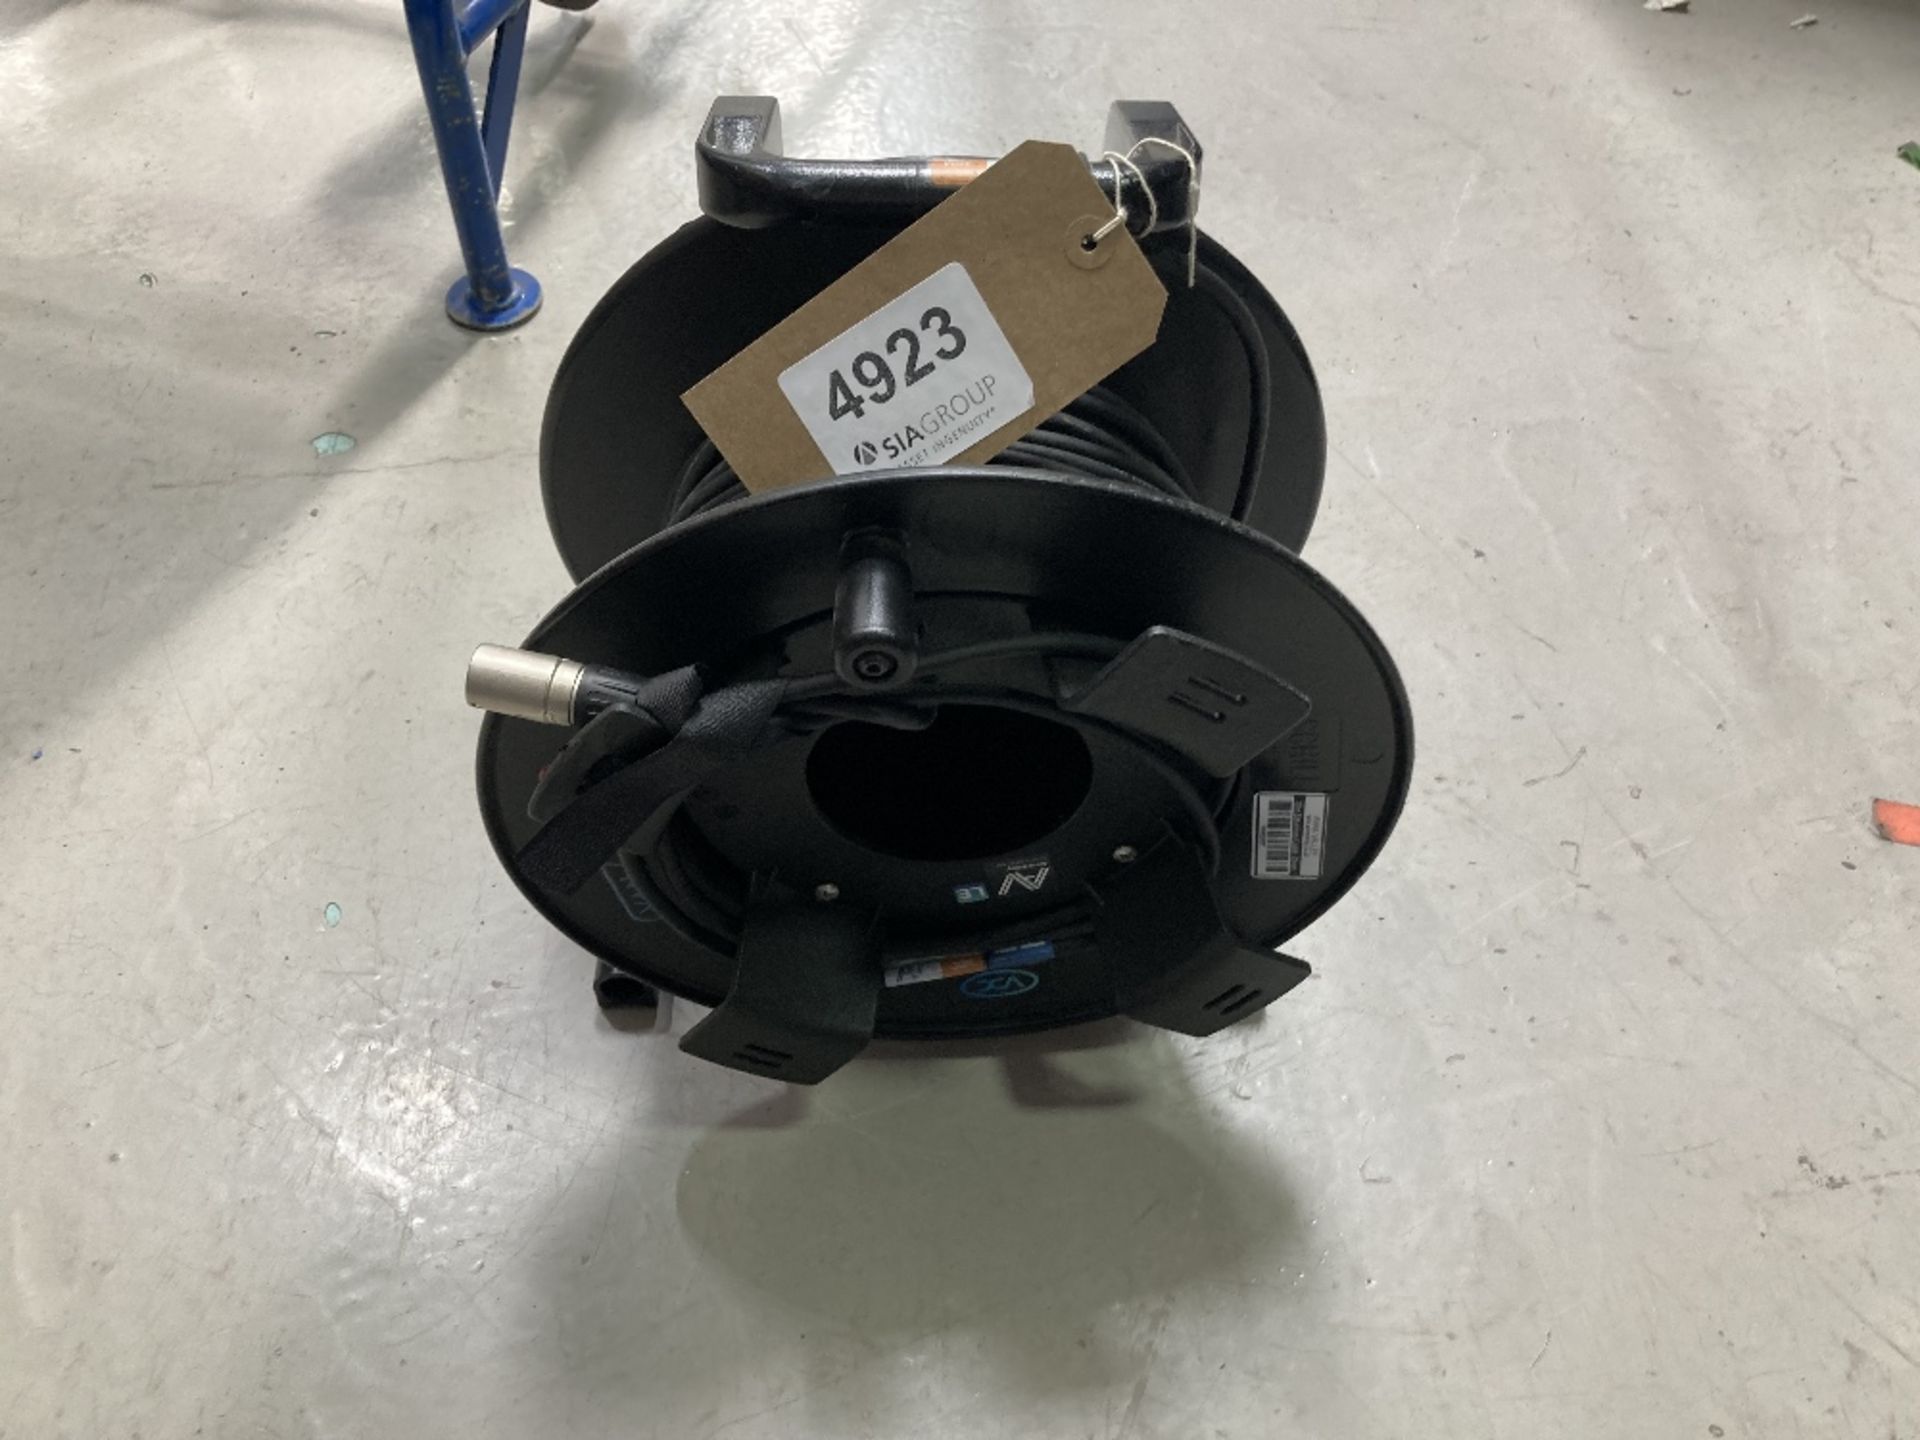 30m Ethercon Cable Reel